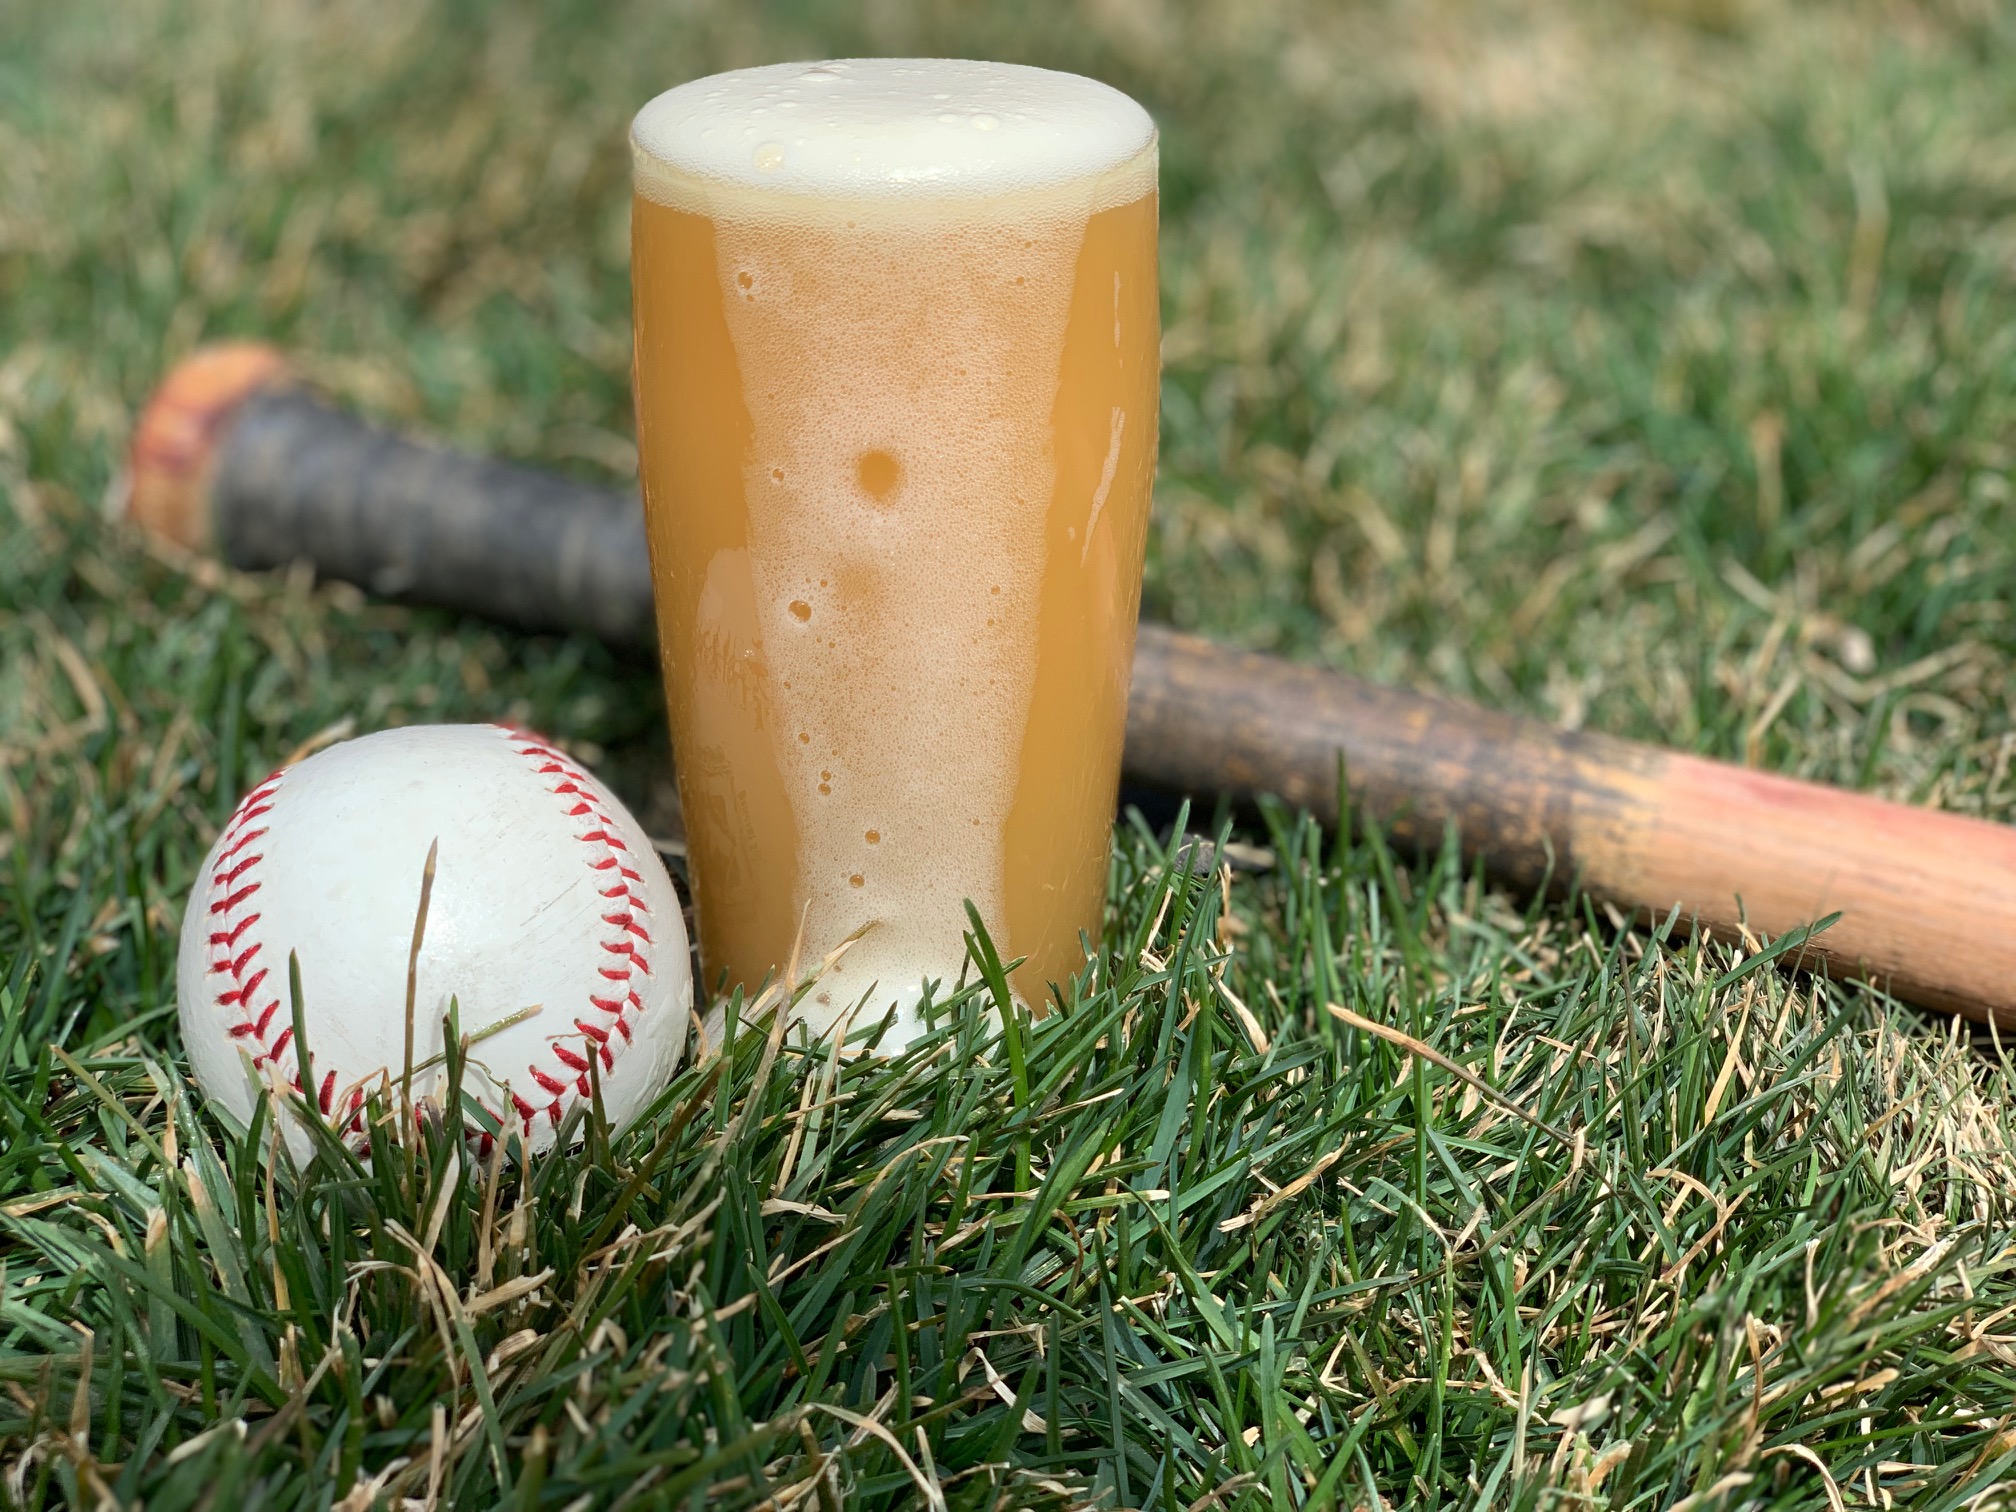 An Interview with The Athletic’s Baseball Analyst & Craft Beer Guru Eno Sarris